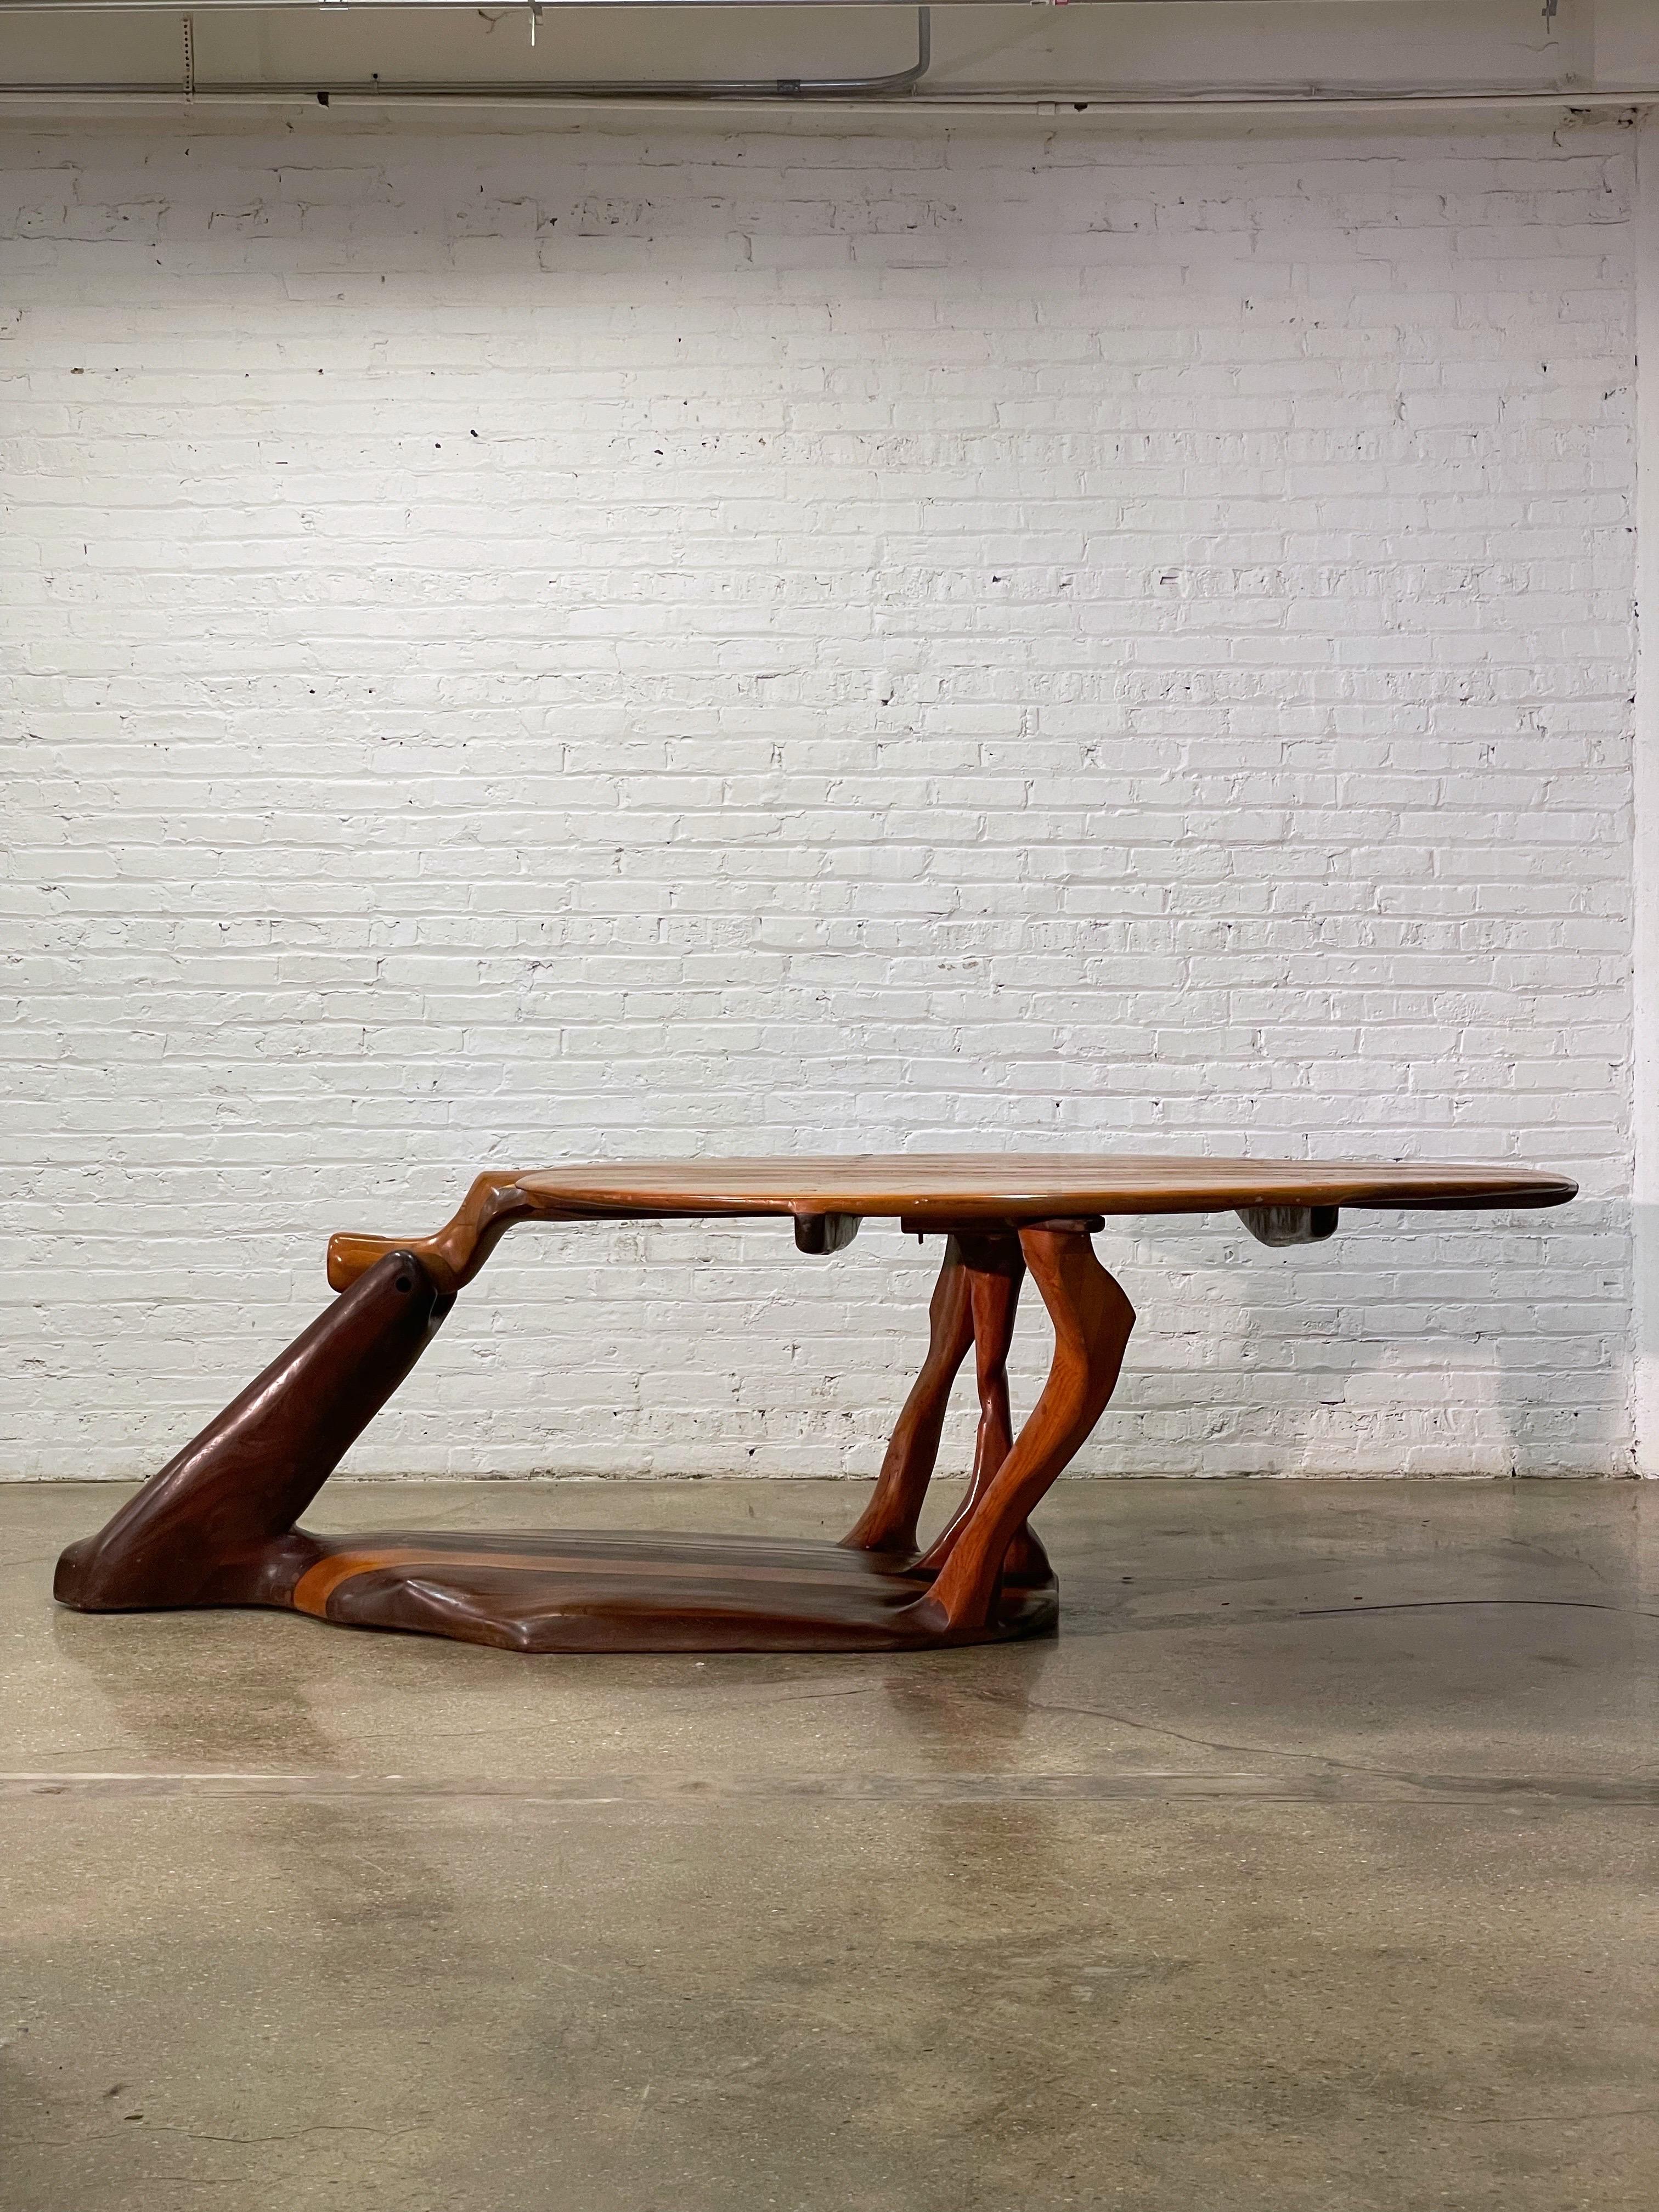 One of a kind sculptural studio craft dining table, c. 1970’s. Signed “Harr” and “Dead Bird.”

This one of a kind, custom built table is both a table and a work of art. It can comfortably seat up to six. 

Please feel free to reach out if you have